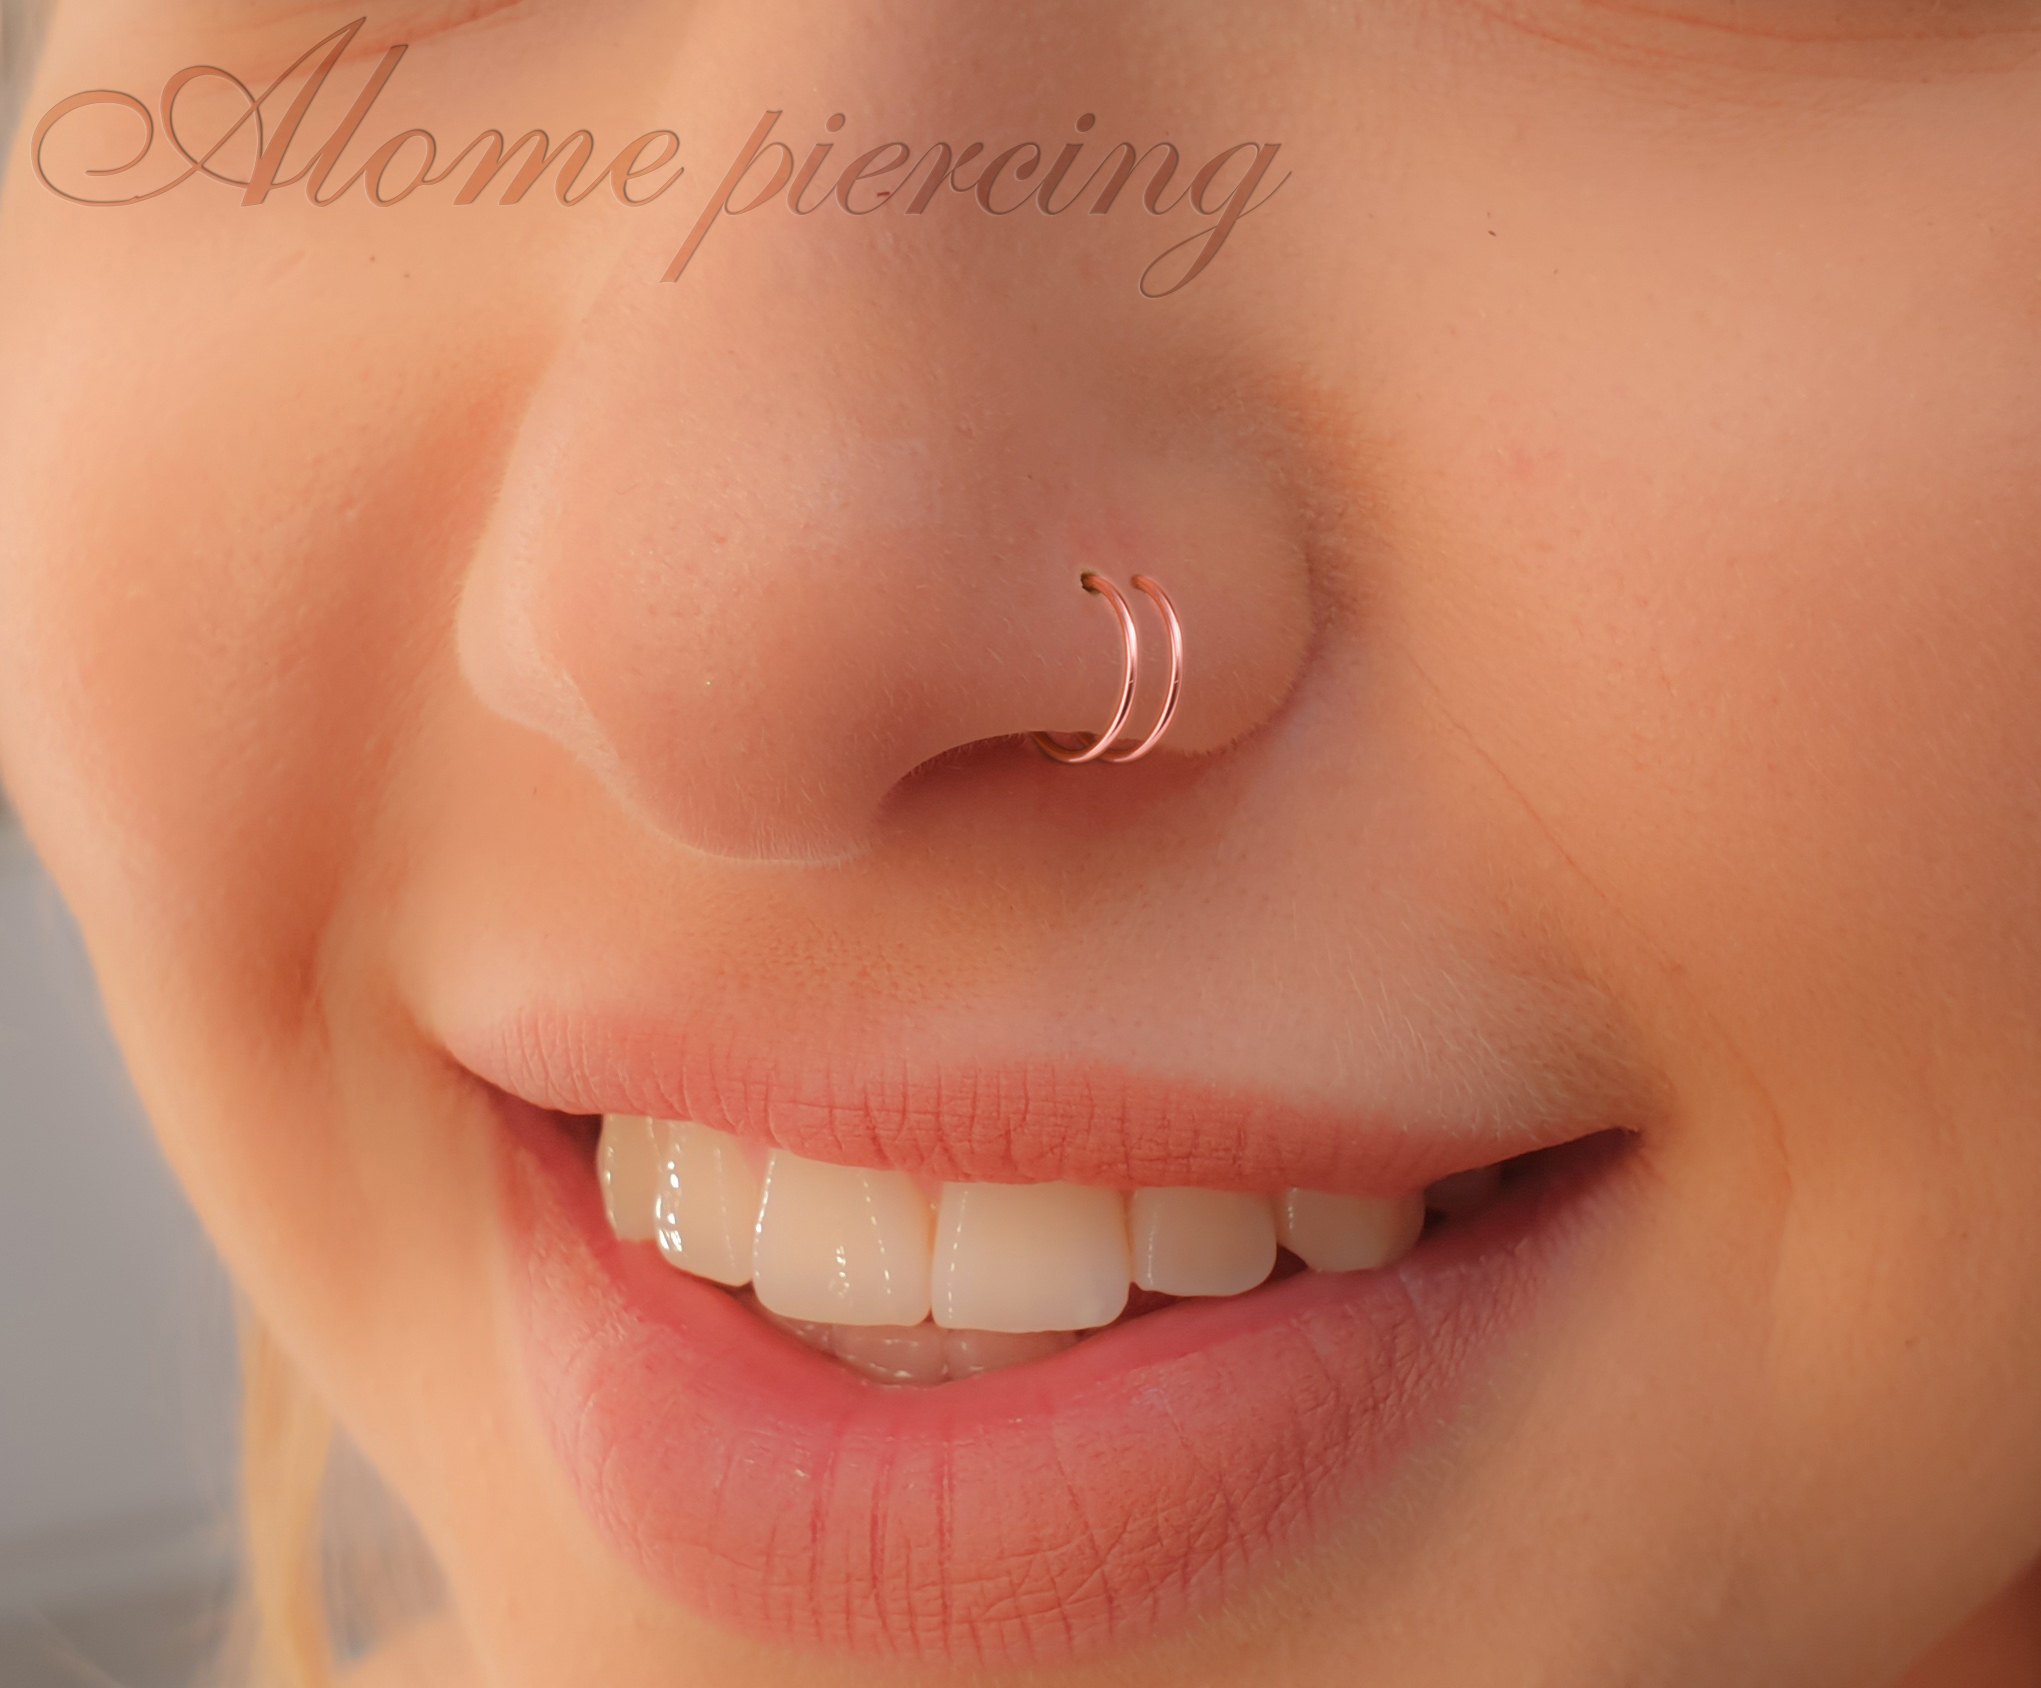 1.5mm Tiny Cubic Zirconia 14K Gold Nose Ring – FreshTrends